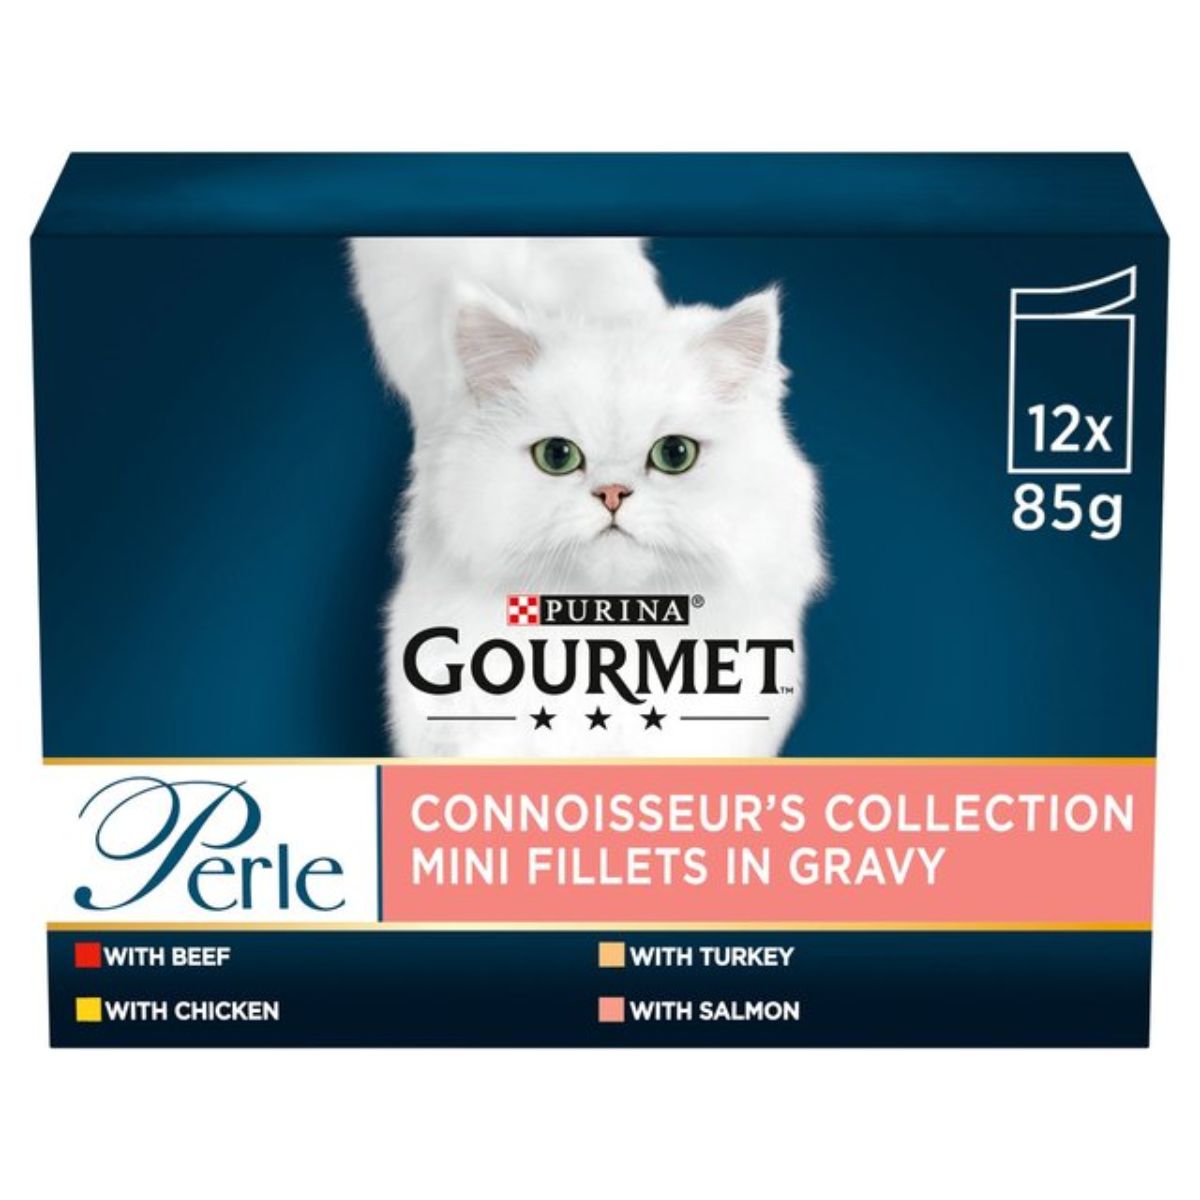 A box of Purina - Gourmet Perle Connoisseurs Collection Mini Fillets in Gravy - 12 x 85g cat food.